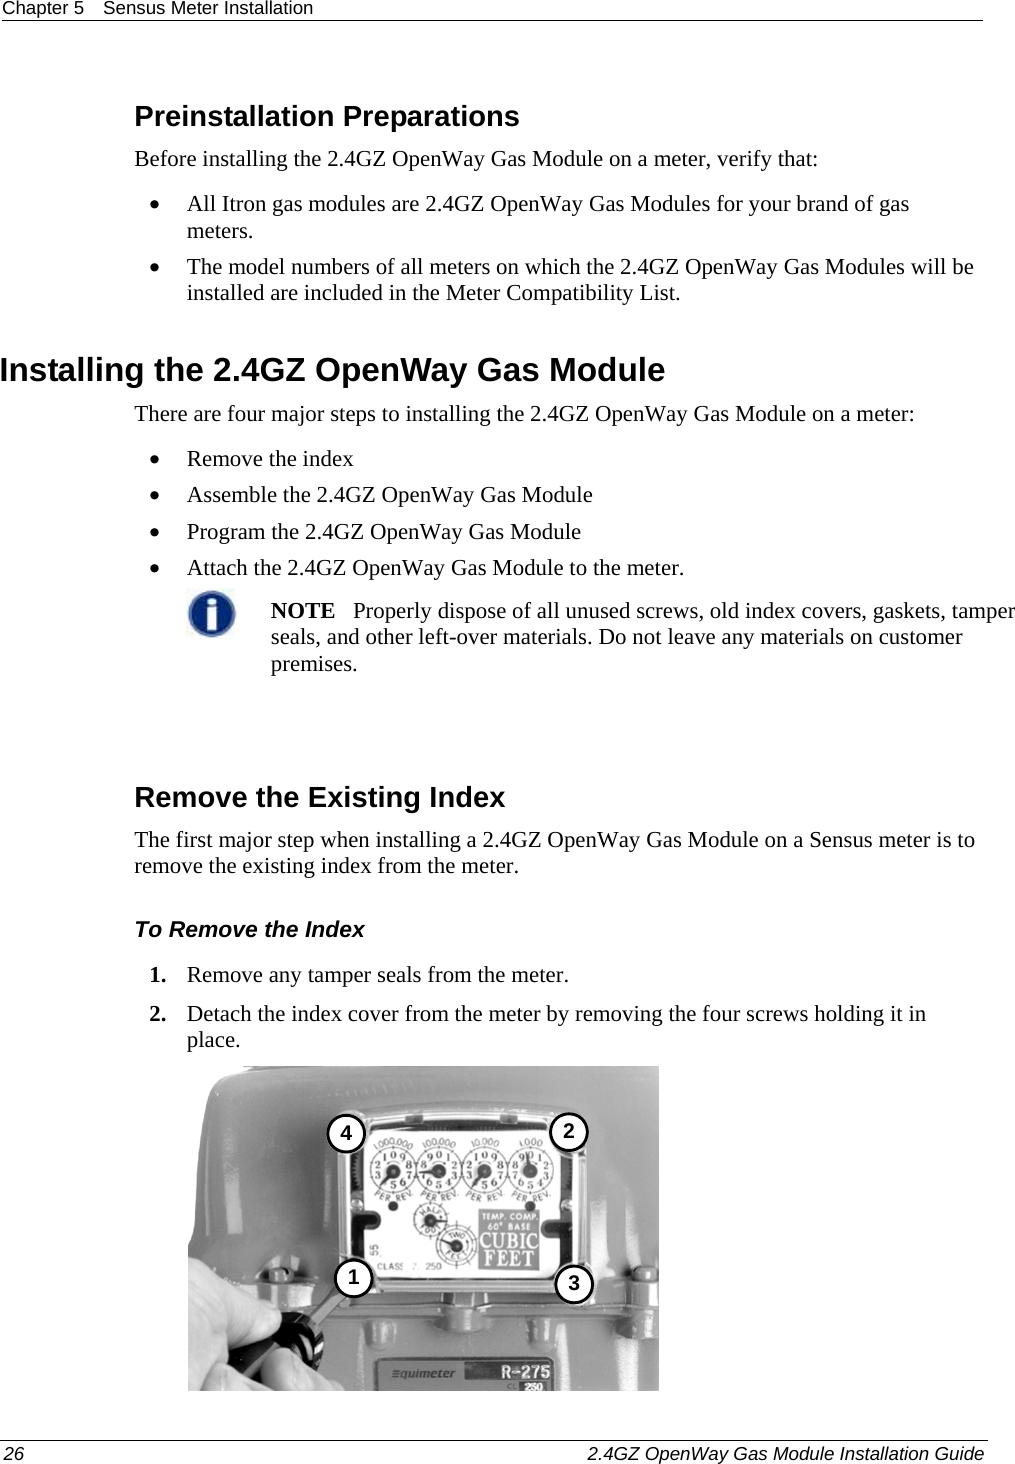 Chapter 5  Sensus Meter Installation  26    2.4GZ OpenWay Gas Module Installation Guide  Preinstallation Preparations Before installing the 2.4GZ OpenWay Gas Module on a meter, verify that:   • All Itron gas modules are 2.4GZ OpenWay Gas Modules for your brand of gas meters.  • The model numbers of all meters on which the 2.4GZ OpenWay Gas Modules will be installed are included in the Meter Compatibility List.  Installing the 2.4GZ OpenWay Gas Module There are four major steps to installing the 2.4GZ OpenWay Gas Module on a meter: • Remove the index • Assemble the 2.4GZ OpenWay Gas Module • Program the 2.4GZ OpenWay Gas Module • Attach the 2.4GZ OpenWay Gas Module to the meter.  NOTE   Properly dispose of all unused screws, old index covers, gaskets, tamper seals, and other left-over materials. Do not leave any materials on customer premises.    Remove the Existing Index The first major step when installing a 2.4GZ OpenWay Gas Module on a Sensus meter is to remove the existing index from the meter.  To Remove the Index 1. Remove any tamper seals from the meter.  2. Detach the index cover from the meter by removing the four screws holding it in place.  3412 